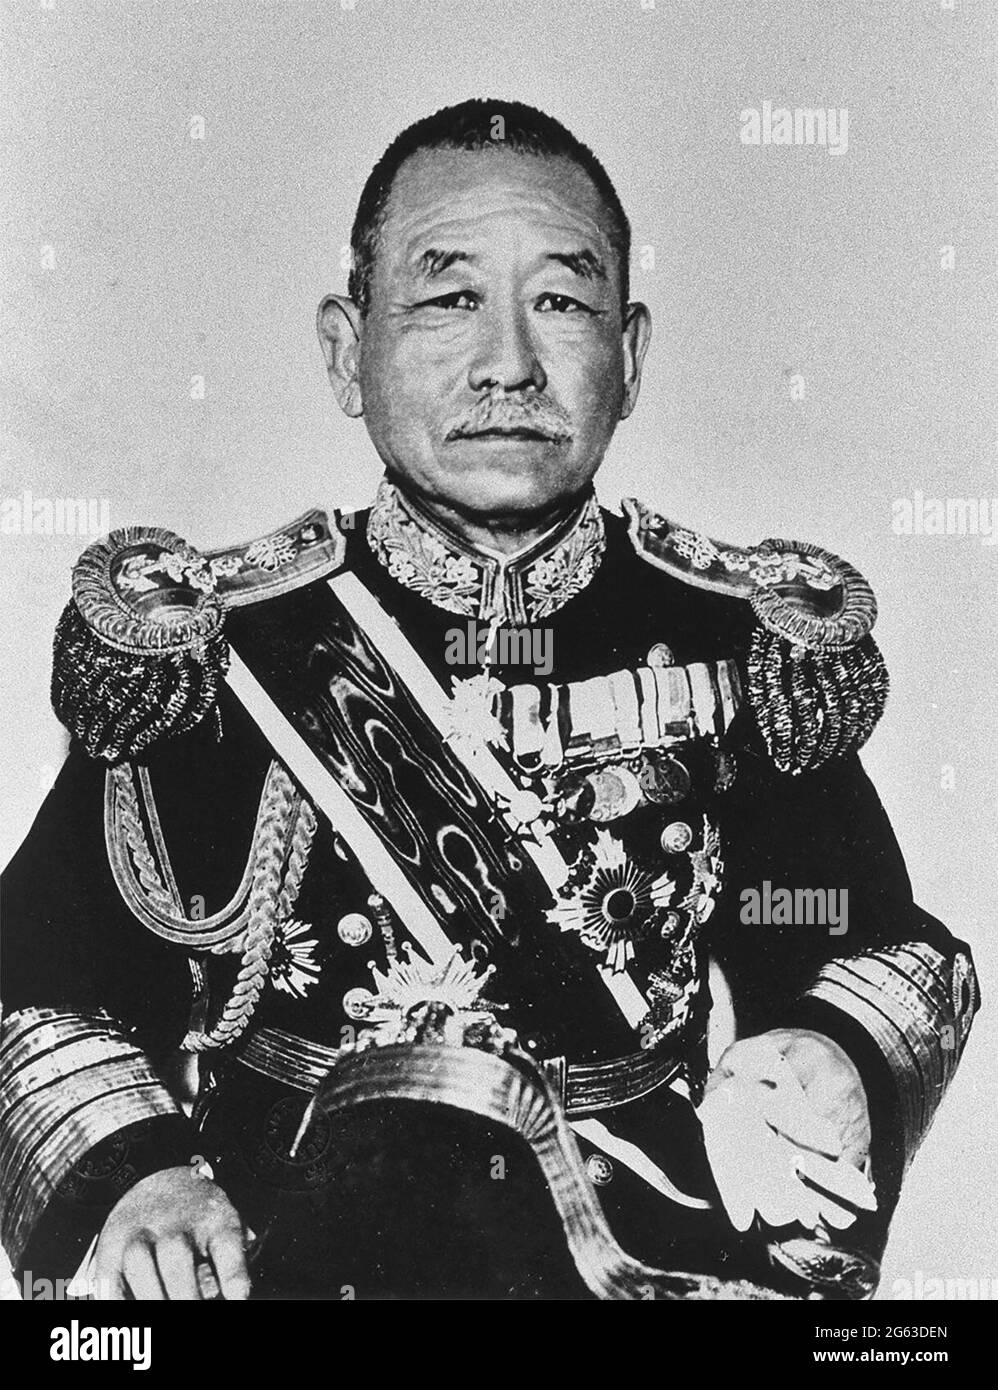 Portrait of Okada Keisuke, an admiral in the Imperial Japanese Navy, politician and Prime Minister of Japan from 1934 to 1936 Stock Photo